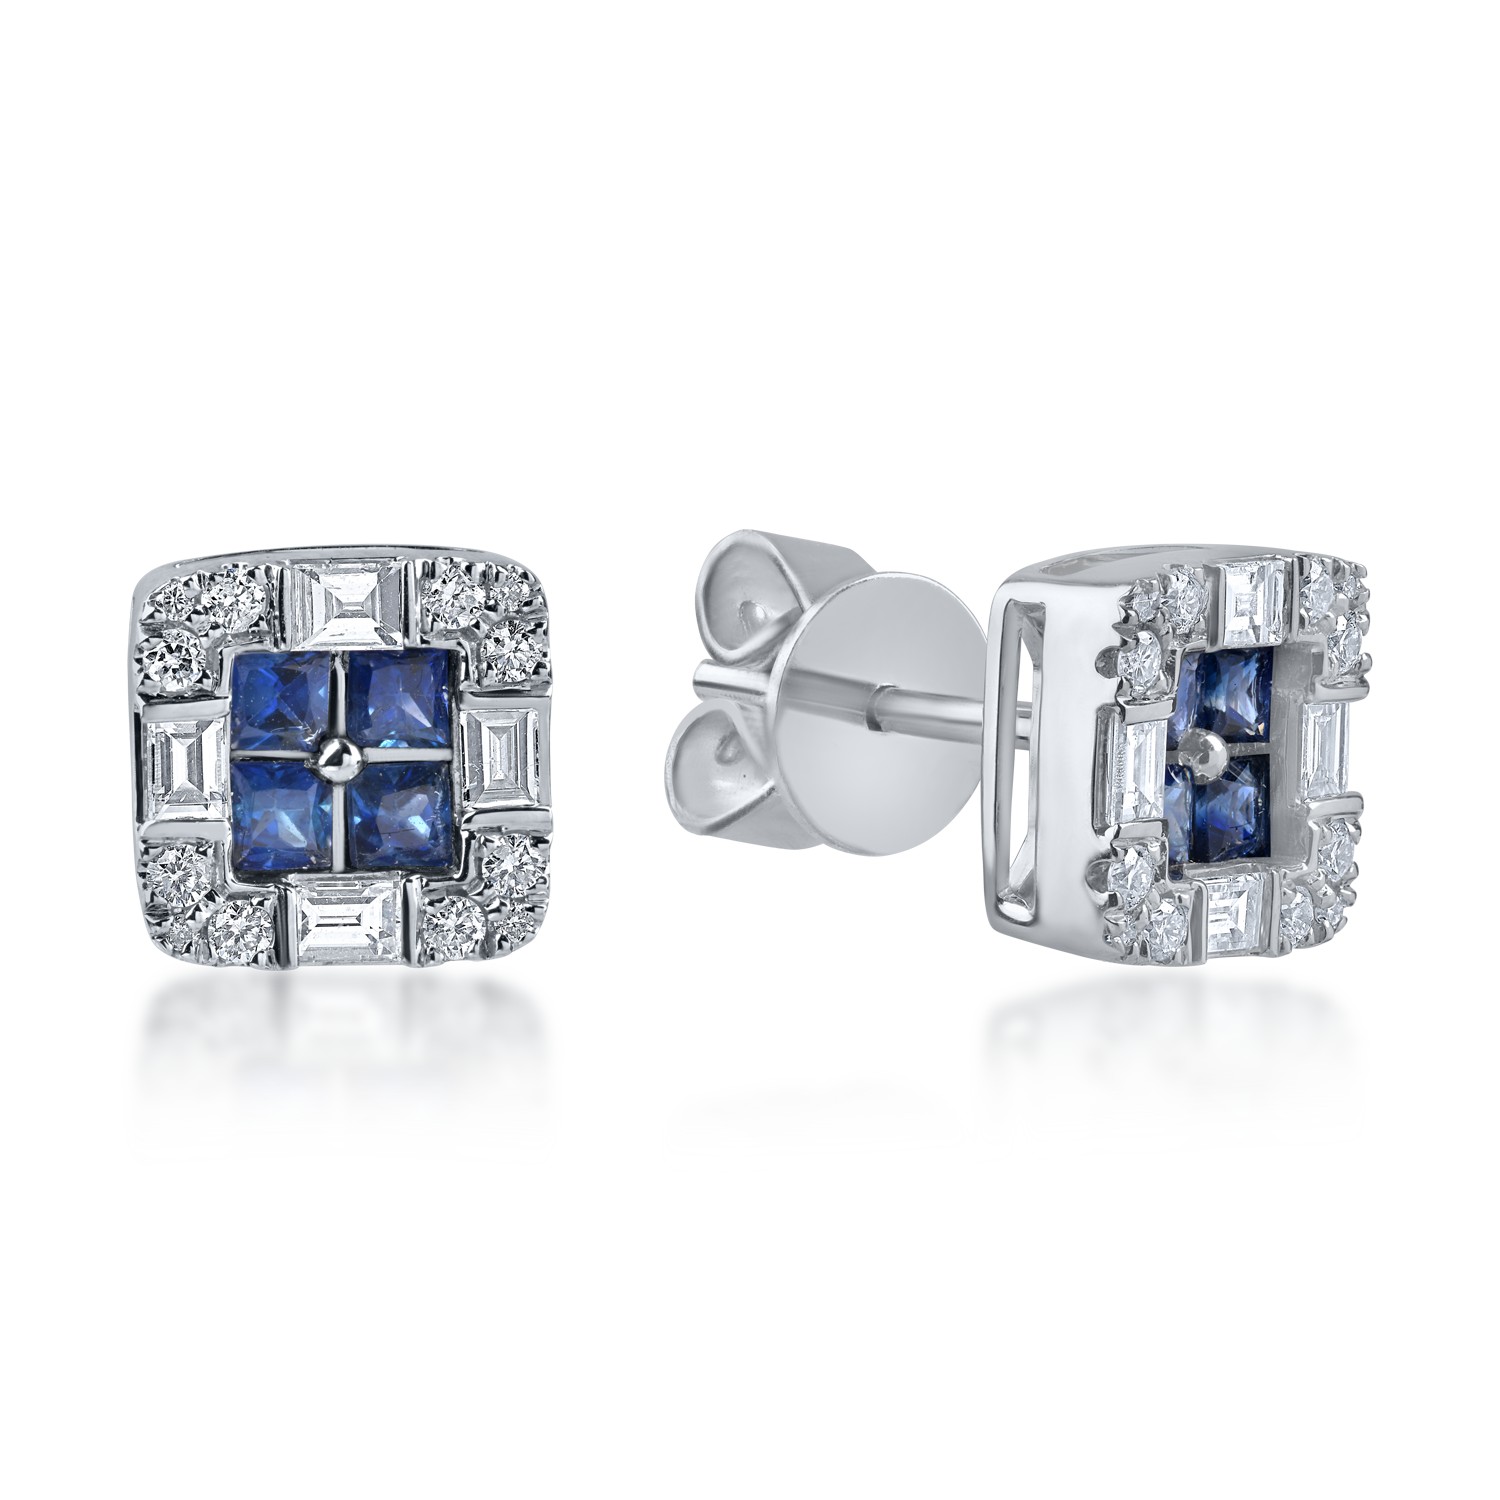 White gold geometric earrings with 0.5ct diamonds and 0.7ct sapphires